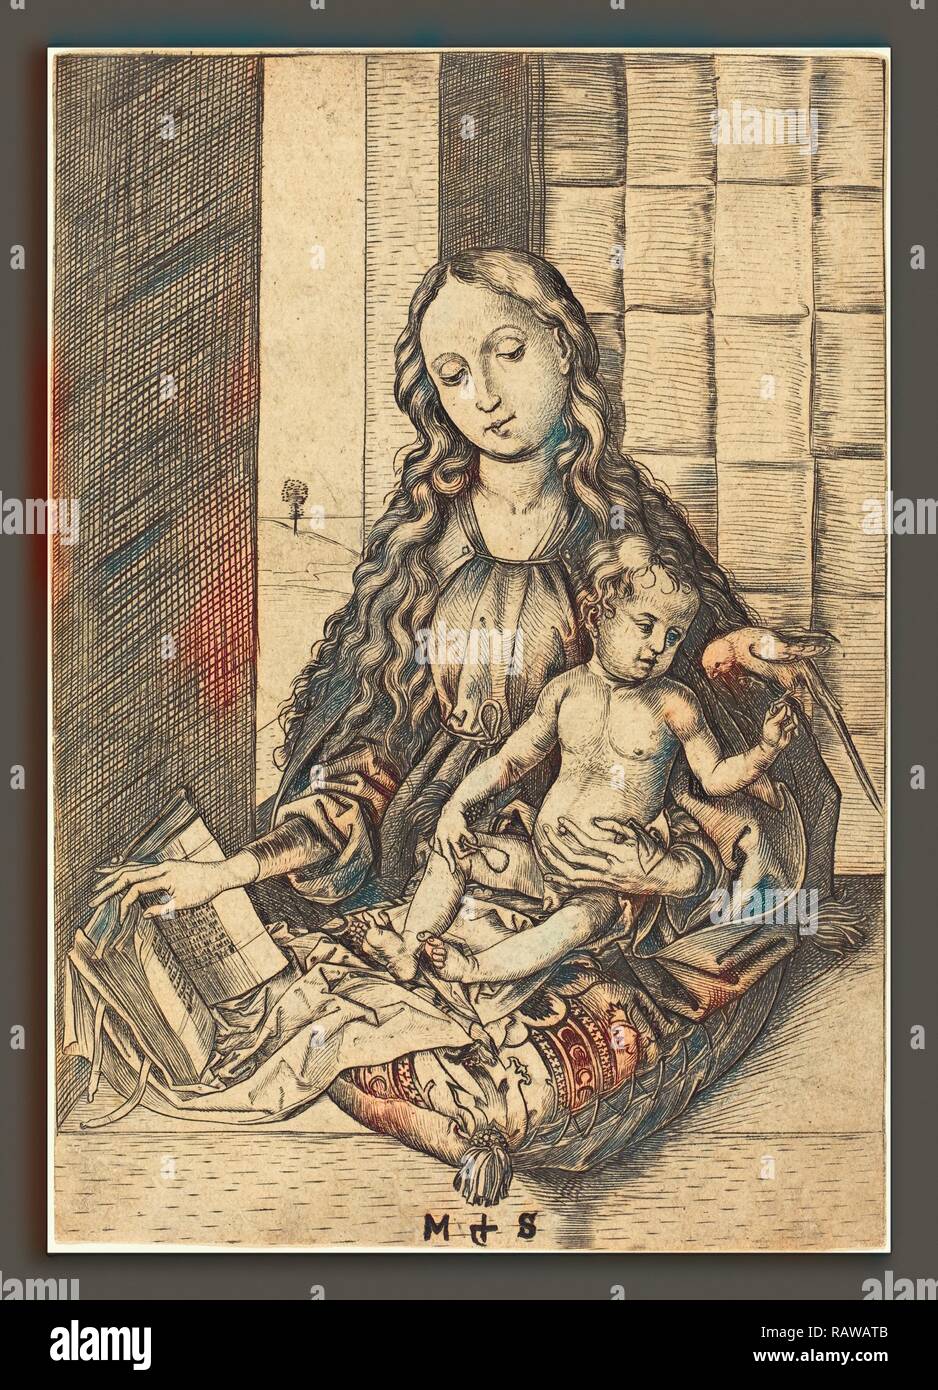 Martin Schongauer (German, c. 1450 - 1491), Madonna with a Parrot, c. 1470-1475, engraving. Reimagined Stock Photo